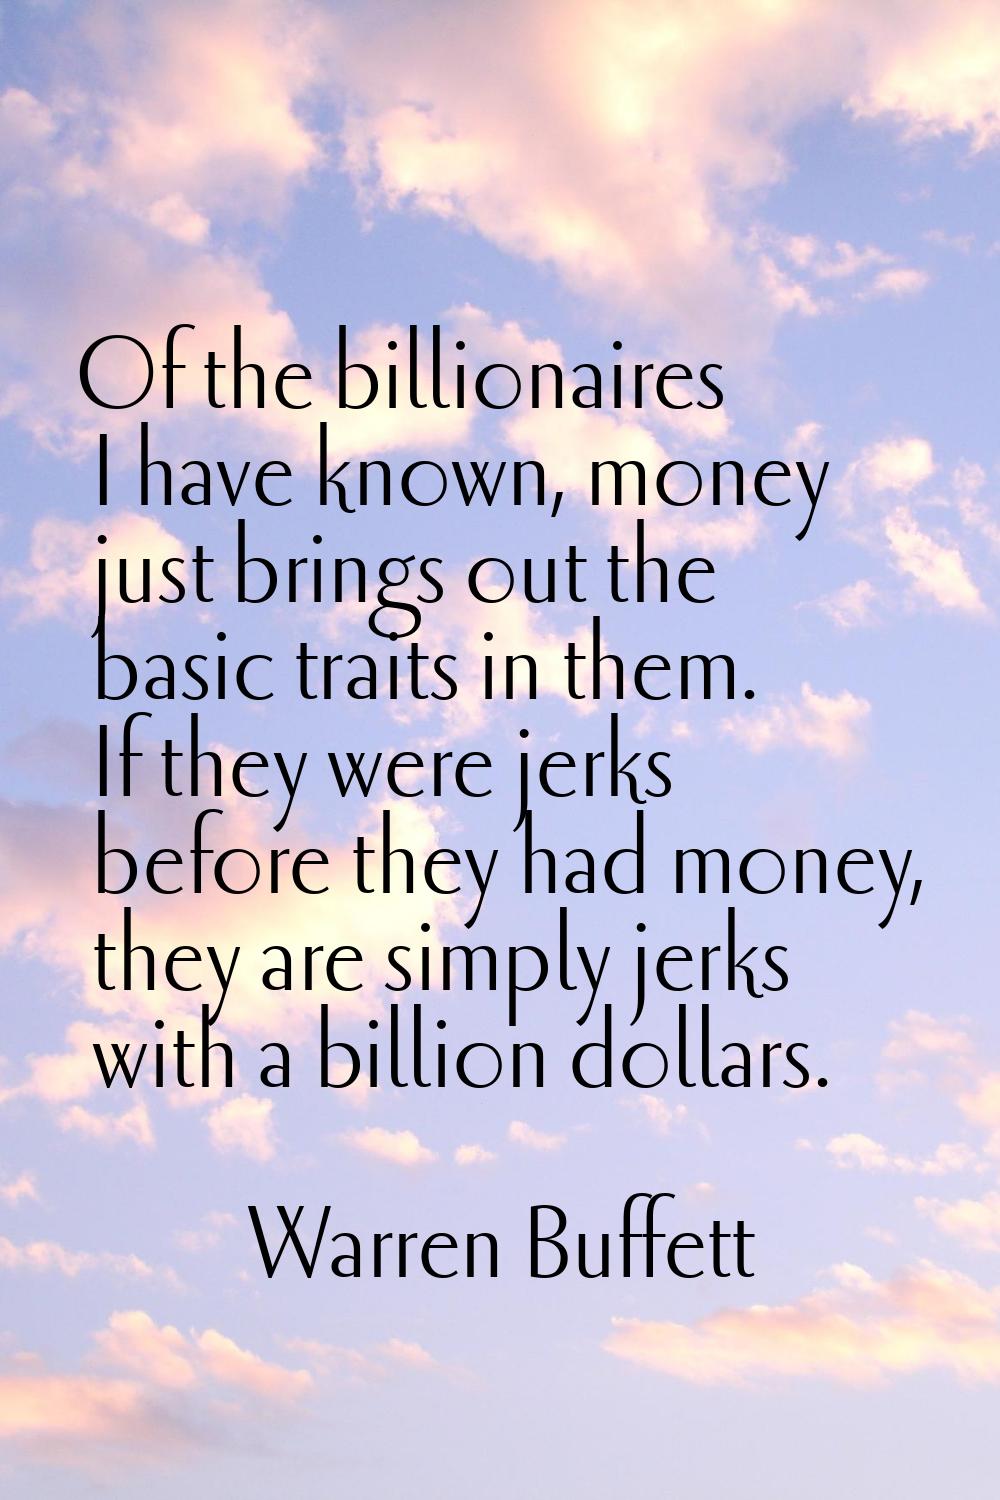 Of the billionaires I have known, money just brings out the basic traits in them. If they were jerk